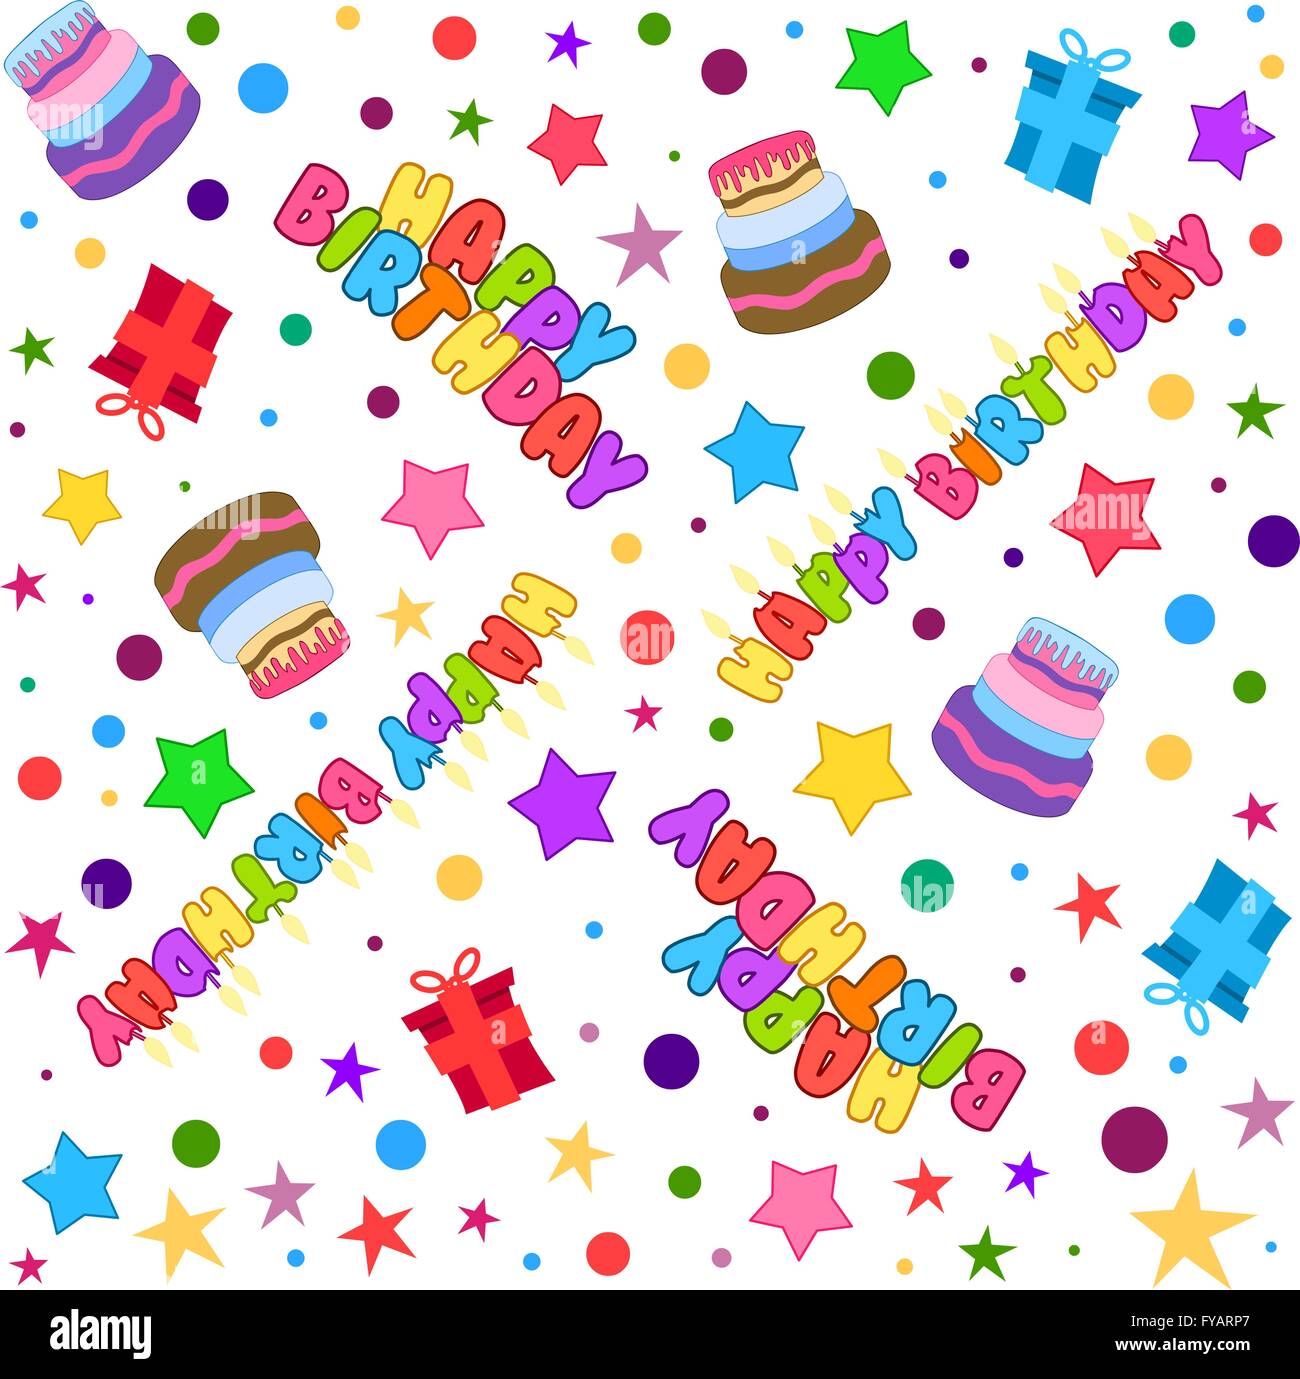 Vector illustration pattern of colorful Happy Birthday text cake presents and stars. Stock Vector